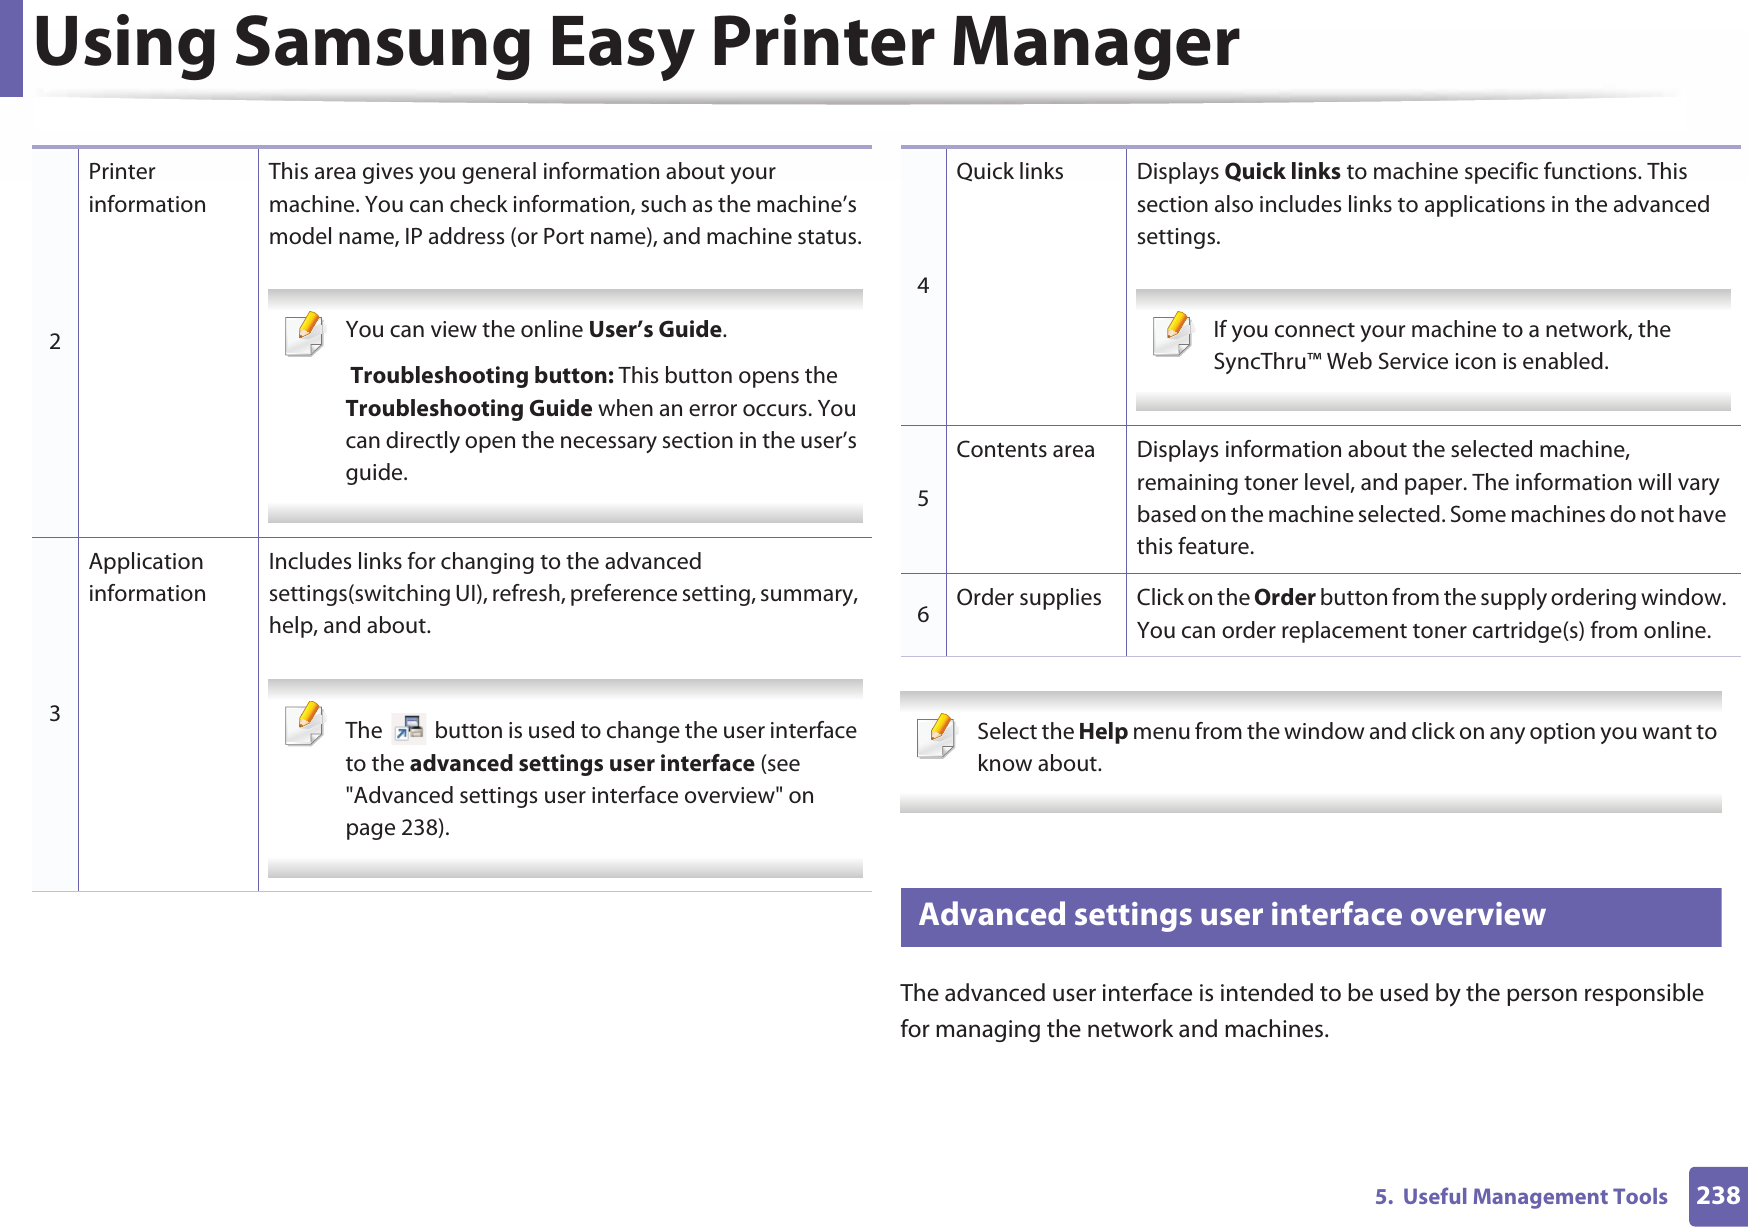 Using Samsung Easy Printer Manager2385.  Useful Management Tools Select the Help menu from the window and click on any option you want to know about.  6 Advanced settings user interface overviewThe advanced user interface is intended to be used by the person responsible for managing the network and machines.2Printer informationThis area gives you general information about your machine. You can check information, such as the machine’s model name, IP address (or Port name), and machine status. You can view the online User’s Guide. Troubleshooting button: This button opens the Troubleshooting Guide when an error occurs. You can directly open the necessary section in the user’s guide.  3Application informationIncludes links for changing to the advanced settings(switching UI), refresh, preference setting, summary, help, and about. The   button is used to change the user interface to the advanced settings user interface (see &quot;Advanced settings user interface overview&quot; on page 238). 4Quick links Displays Quick links to machine specific functions. This section also includes links to applications in the advanced settings. If you connect your machine to a network, the SyncThru™ Web Service icon is enabled. 5Contents area Displays information about the selected machine, remaining toner level, and paper. The information will vary based on the machine selected. Some machines do not have this feature.6Order supplies Click on the Order button from the supply ordering window. You can order replacement toner cartridge(s) from online.